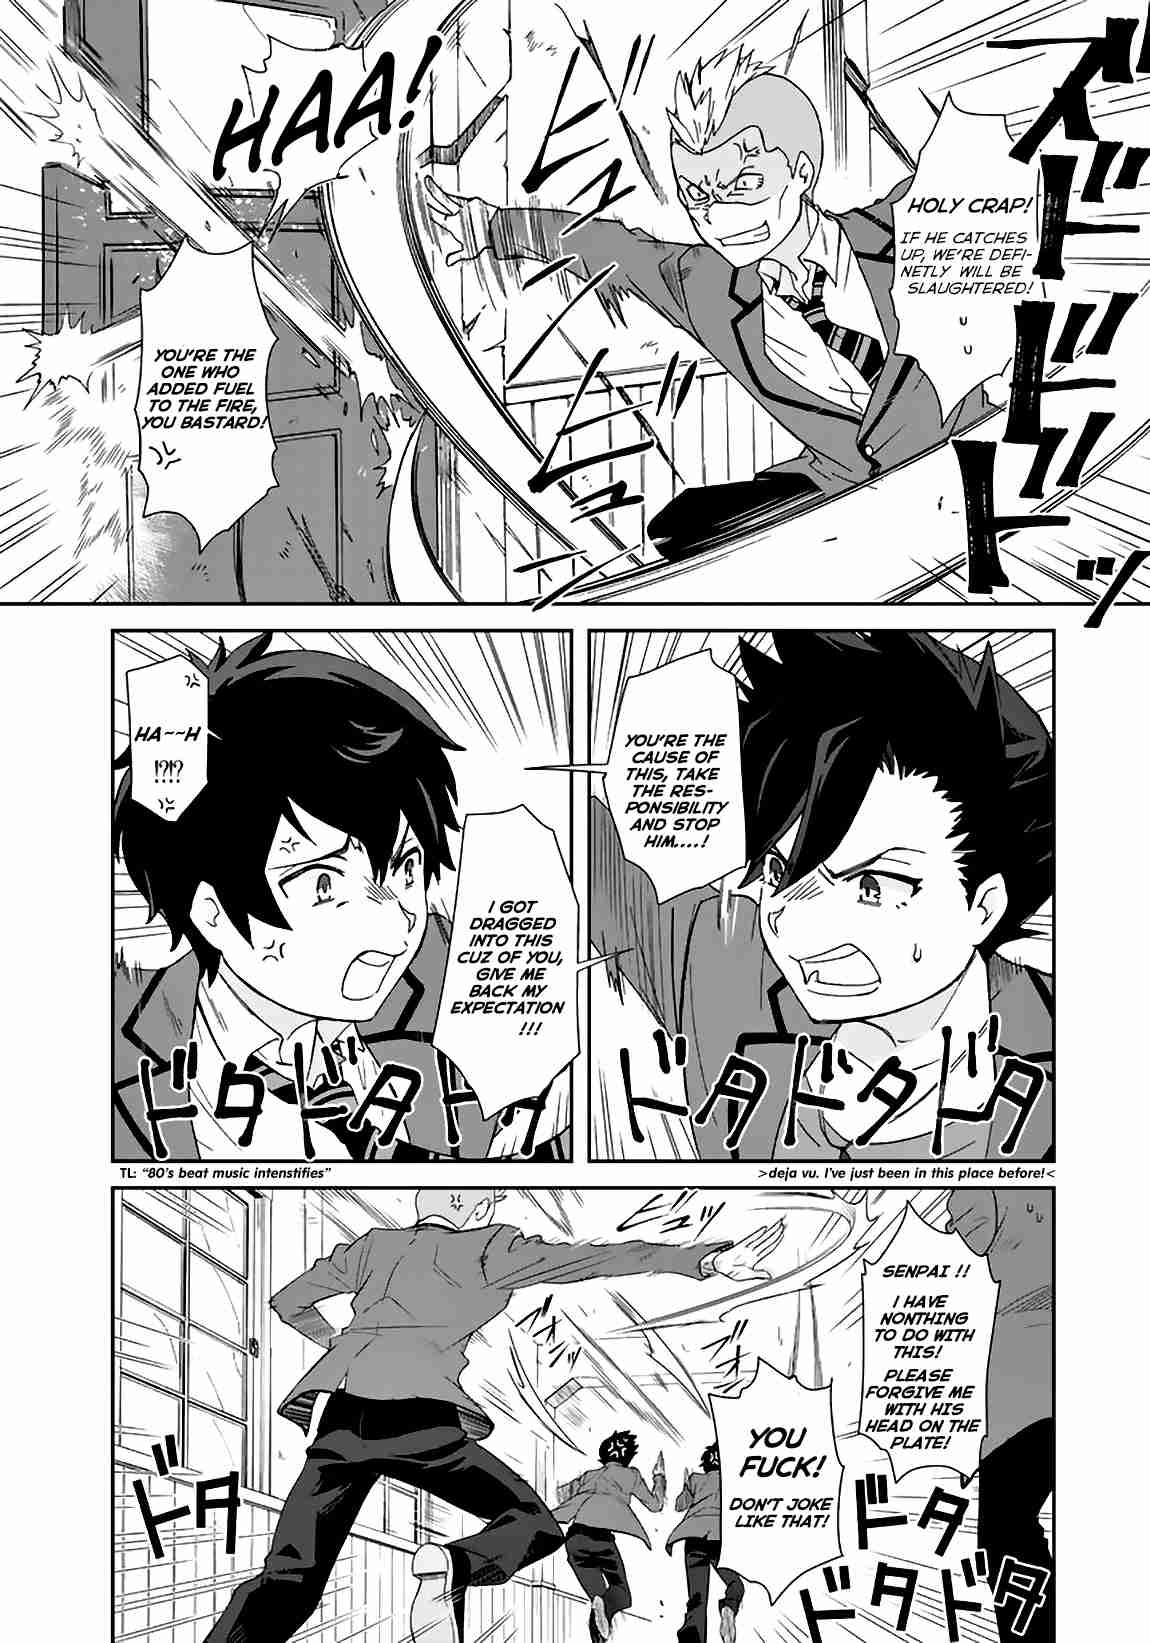 I, Who Acquired a Trash Skill 【Thermal Operator】, Became Unrivaled. Vol. 1 Ch. 2